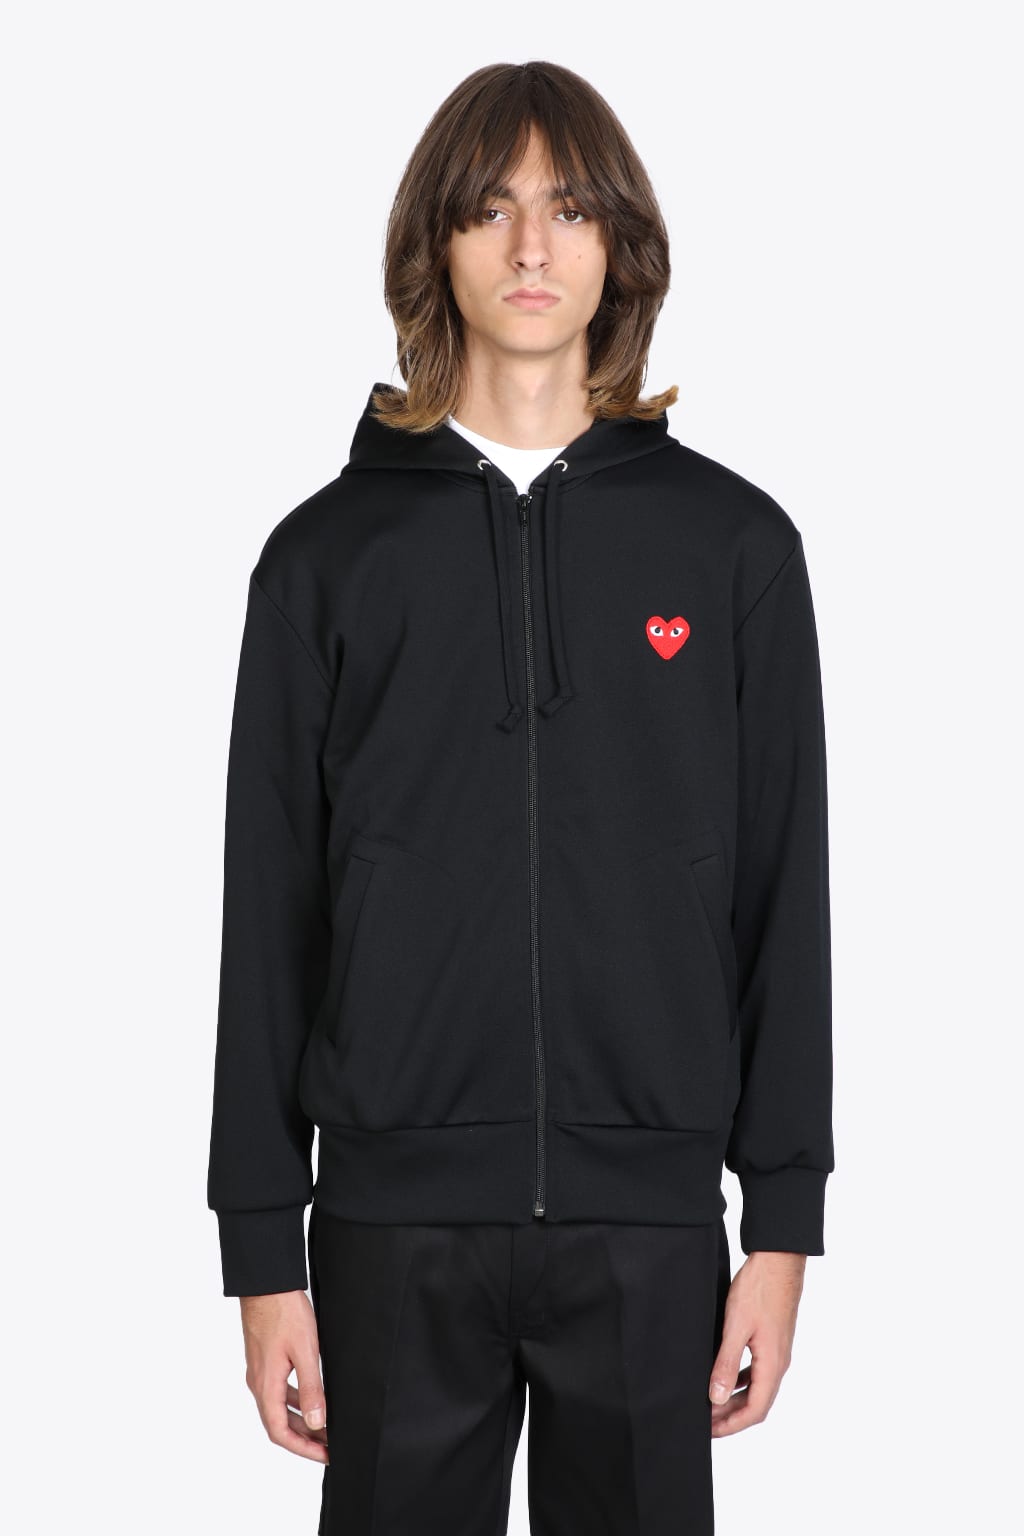 Comme des Garçons Play Mens Sweatshirt Knit Black Zip-up Hoodie With Red Heart Patch.